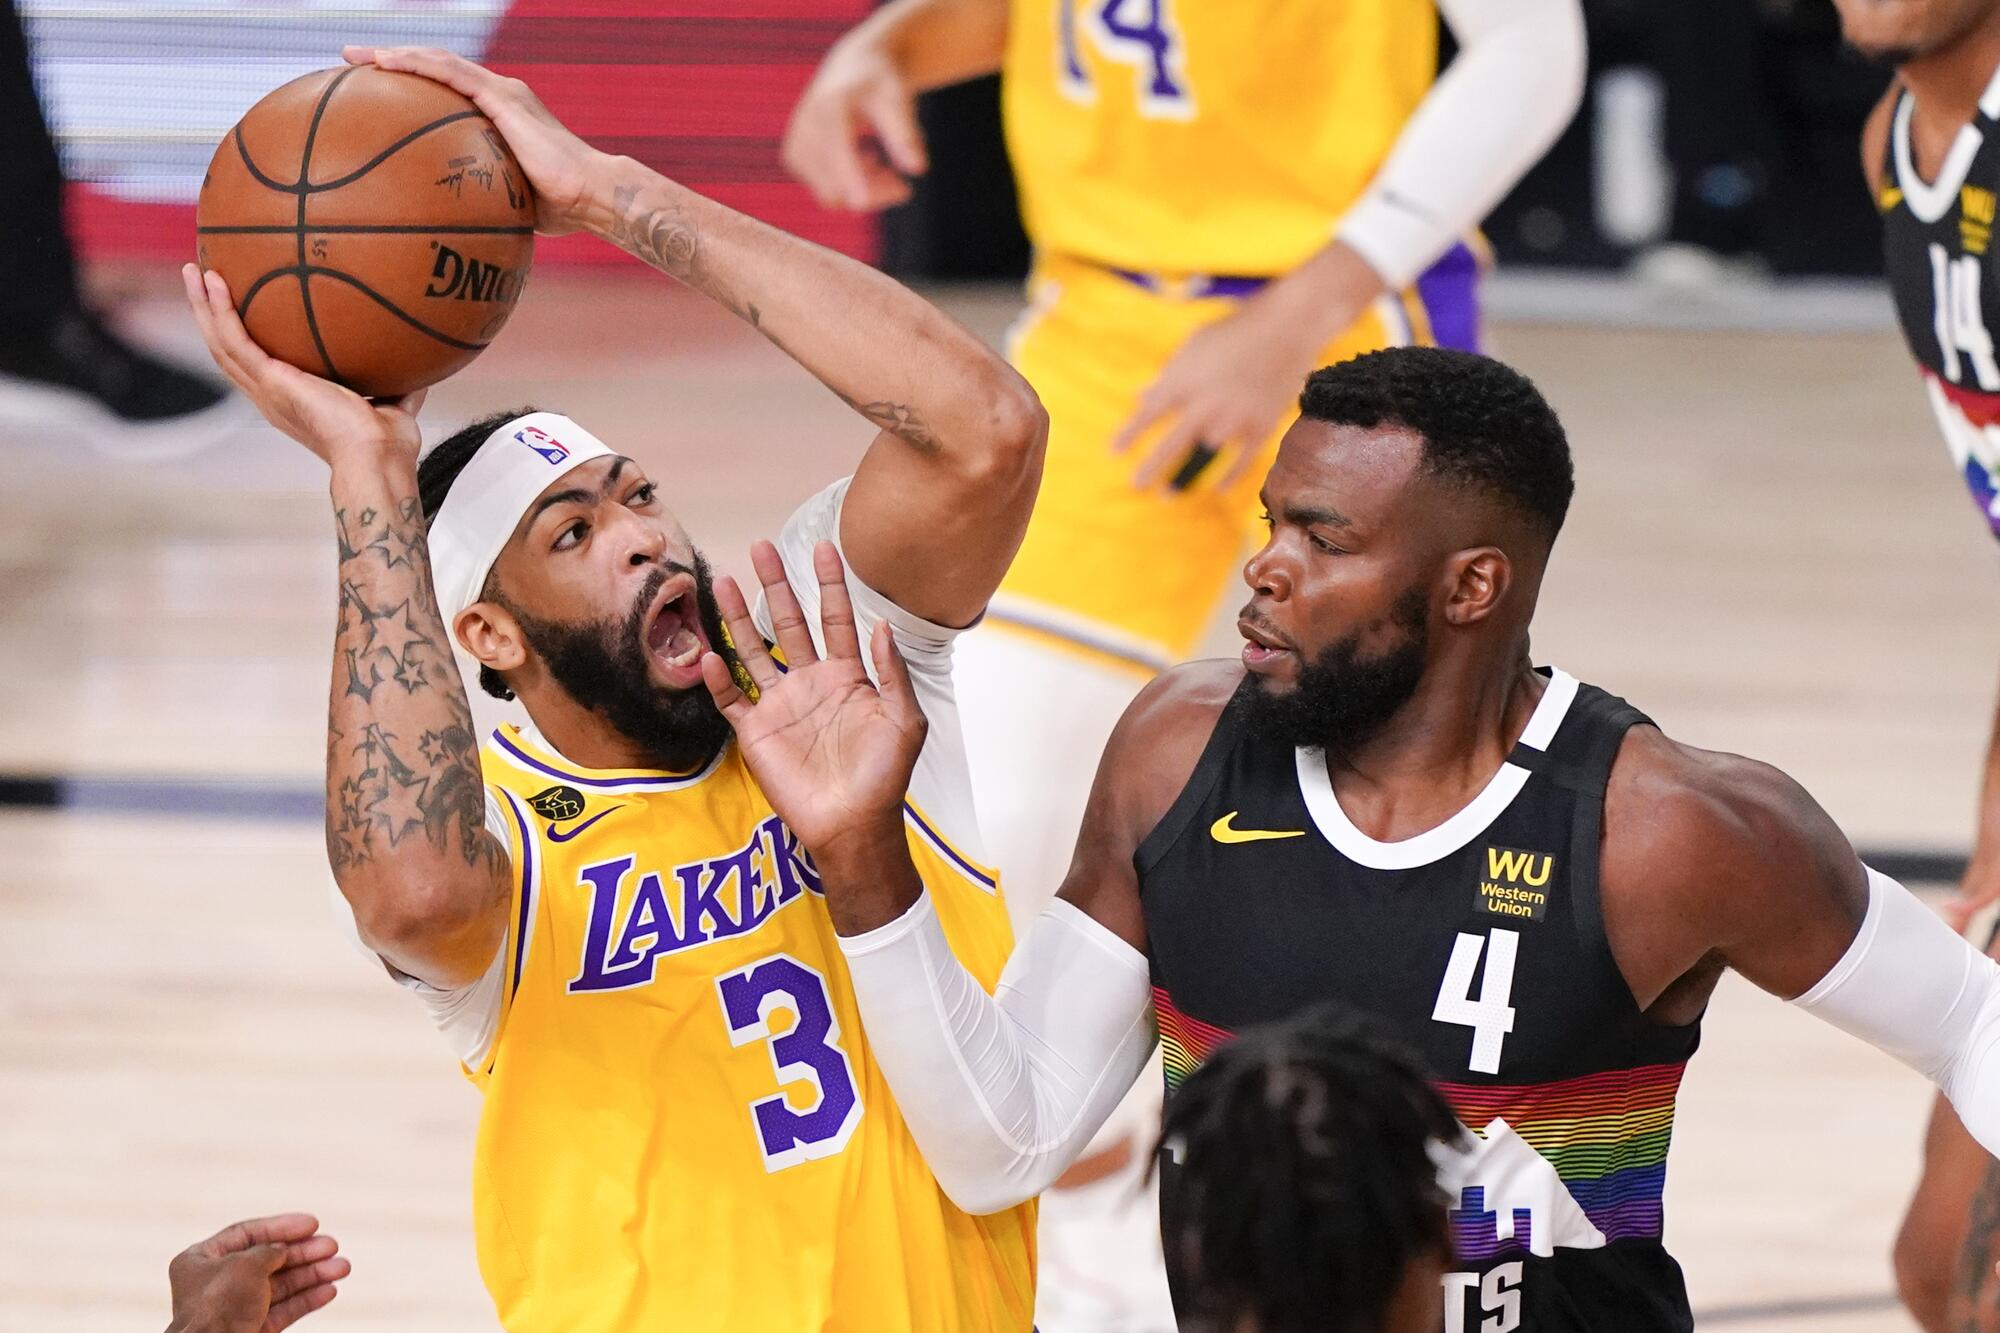 Jared Dudley provides Lakers with quality play and toughness in absence of  Kyle Kuzma